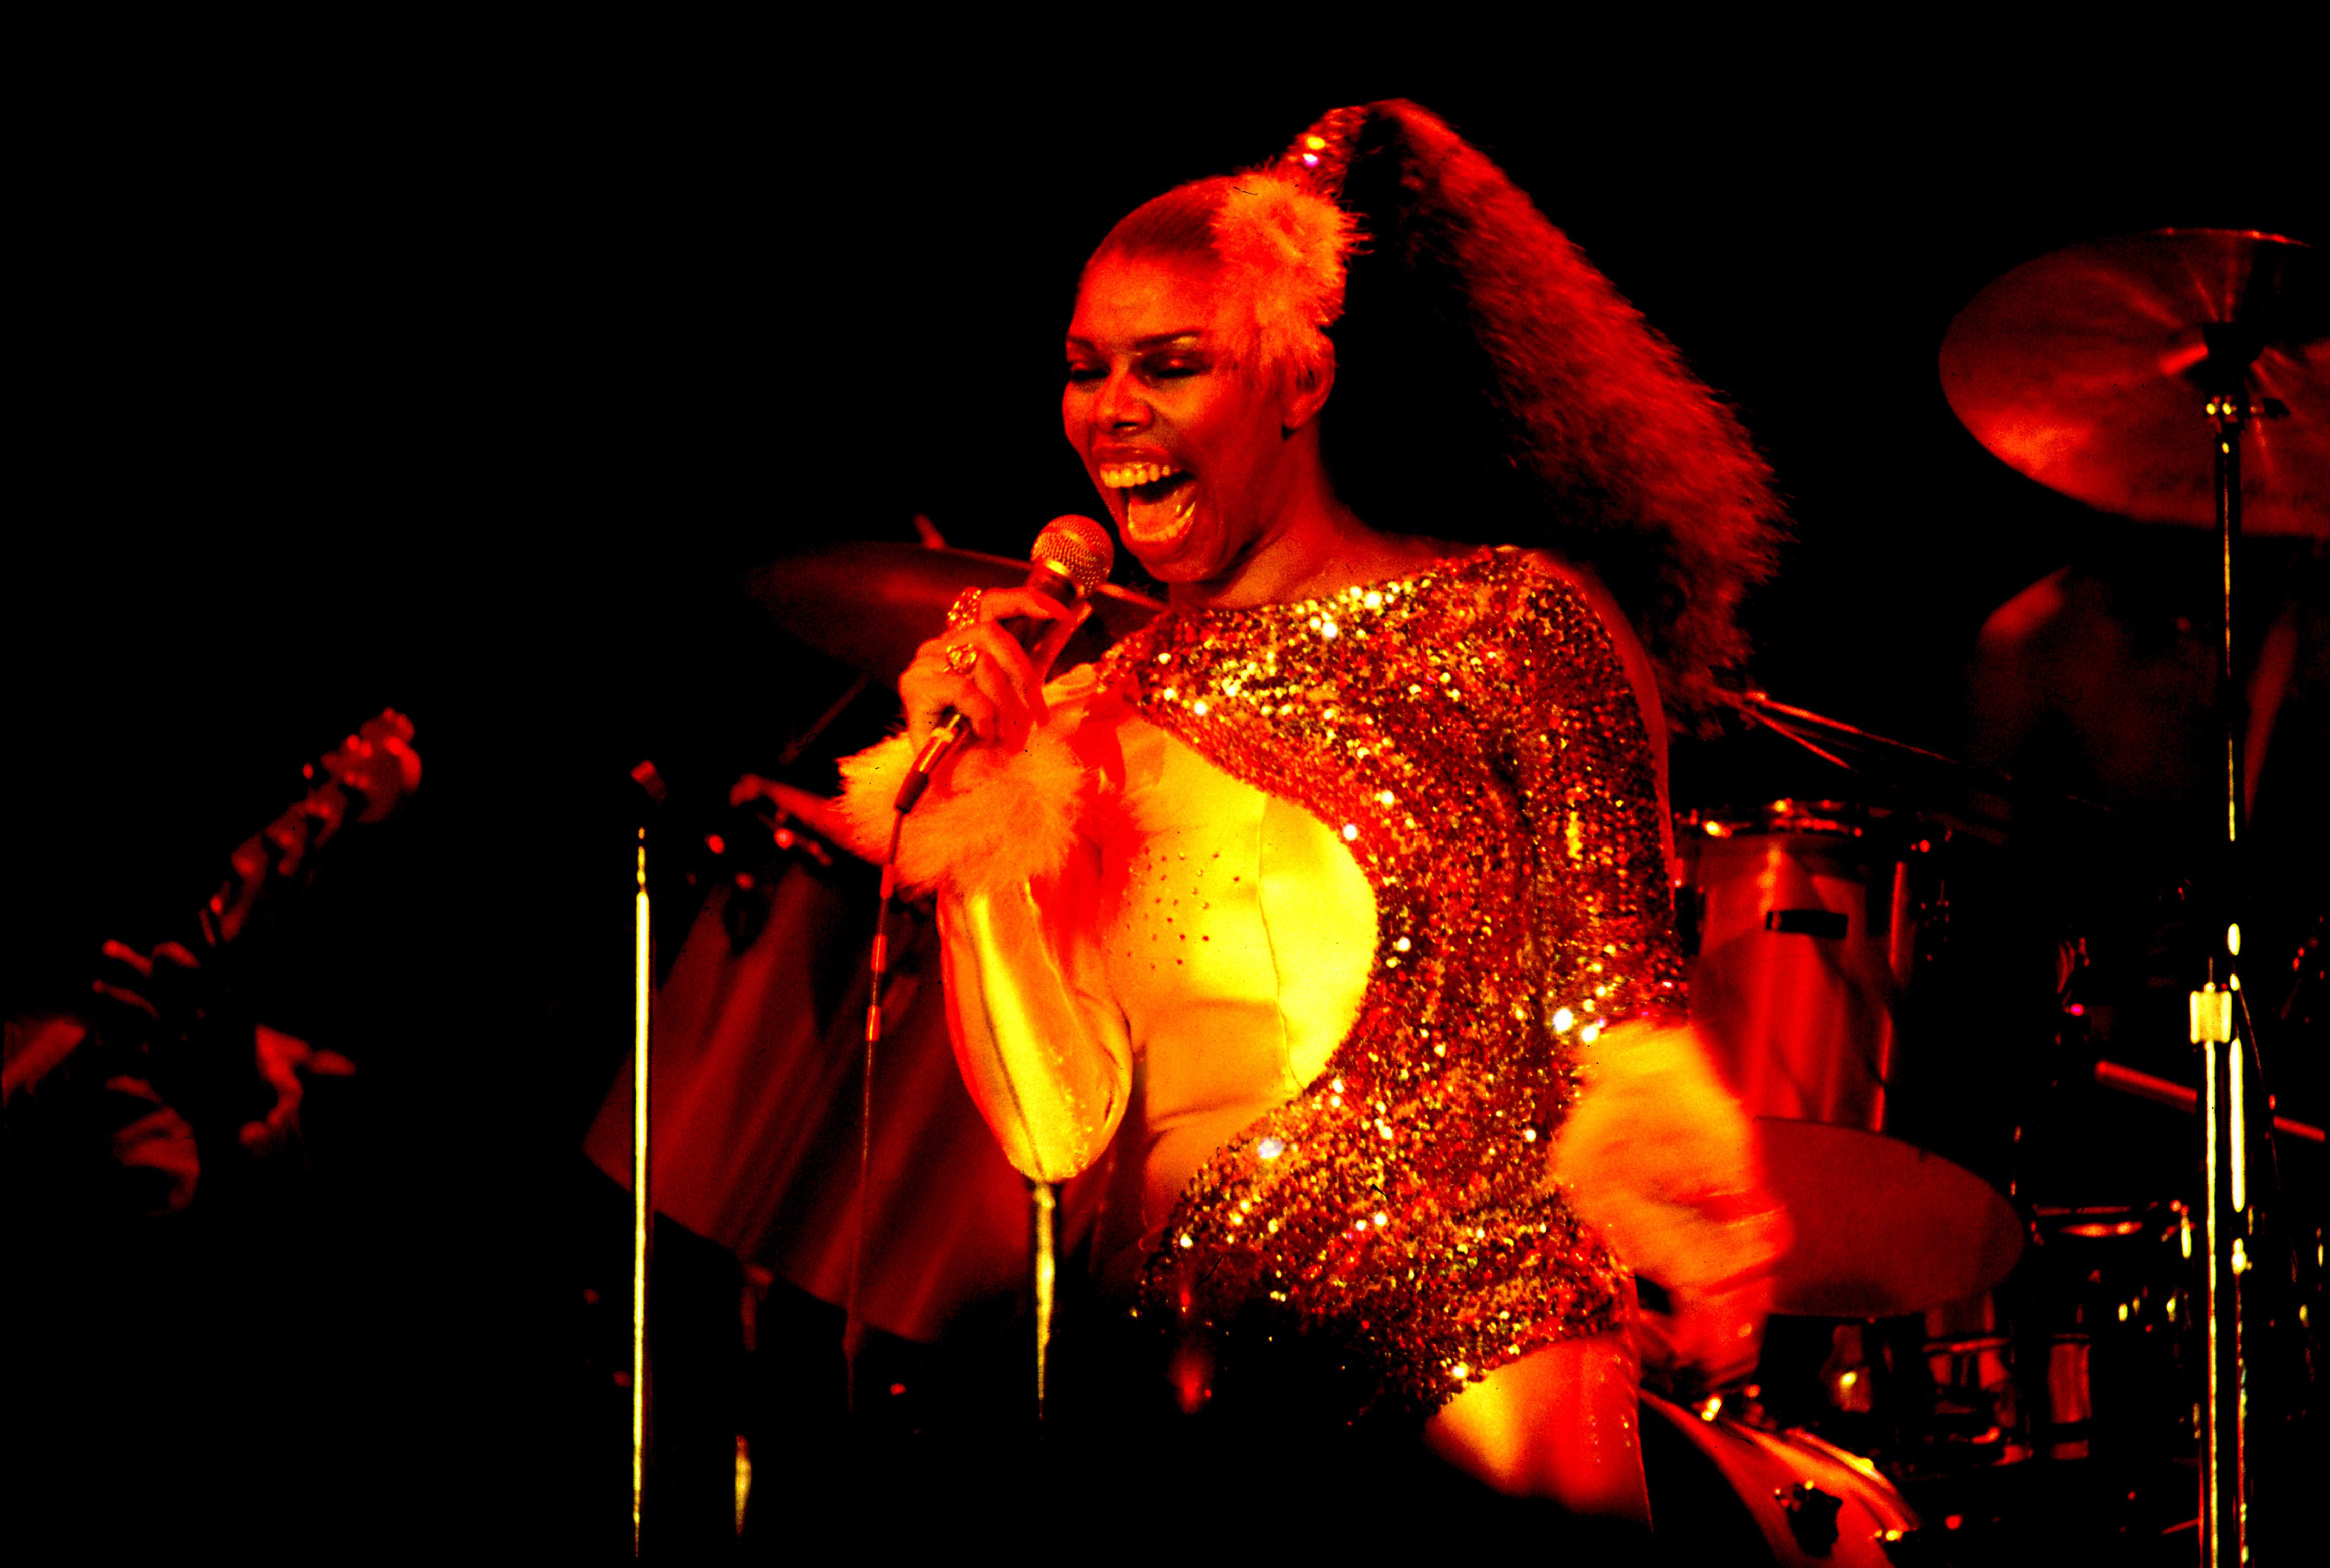 American musician Millie Jackson performs onstage at the Park West Auditorium, Chicago, Illinois on May 30, 1980. | Photo: Getty Images